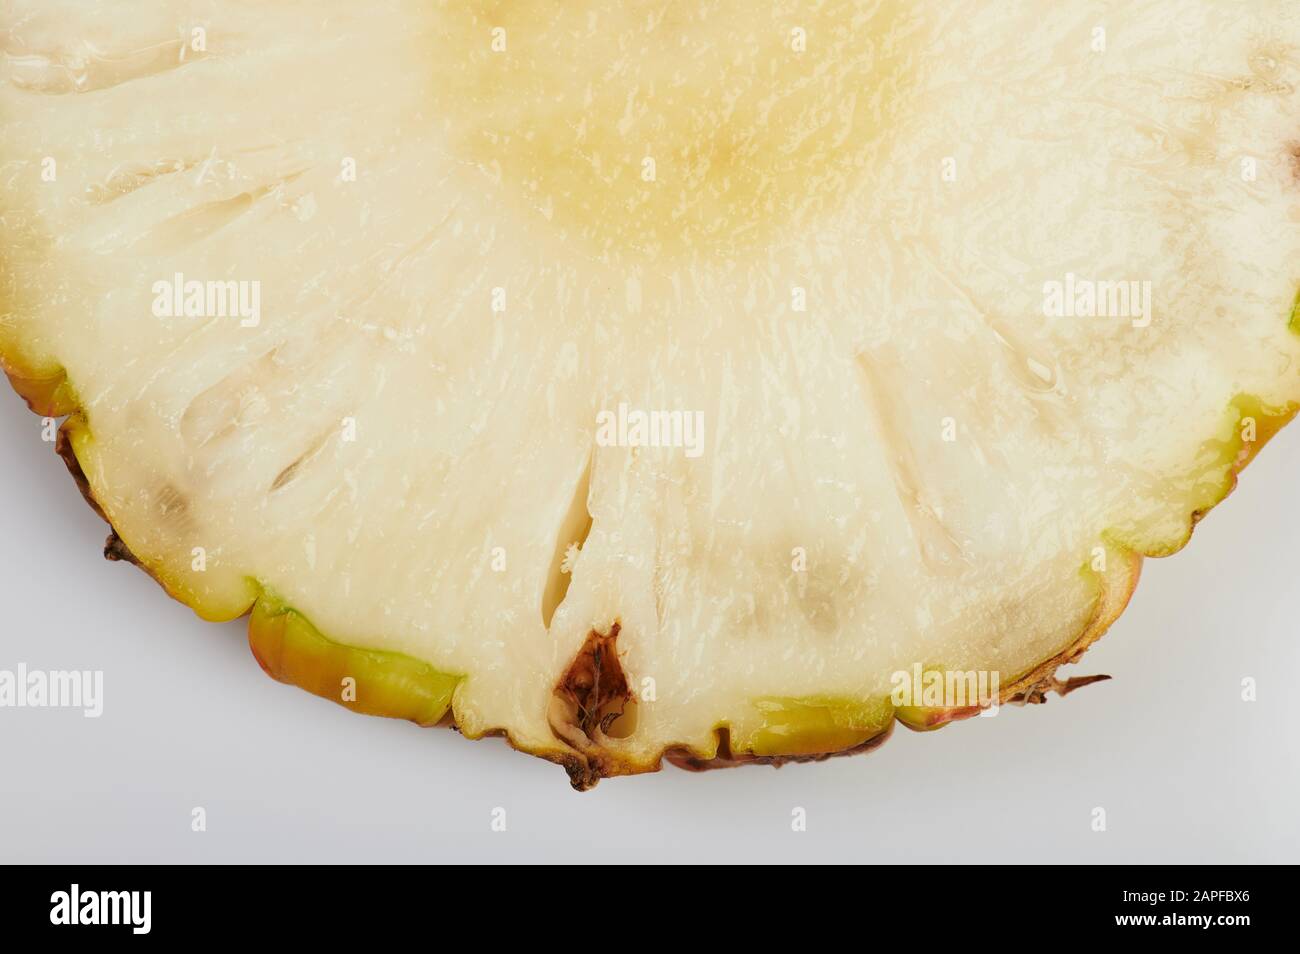 One slice of fresh pineapple isolated close up view Stock Photo